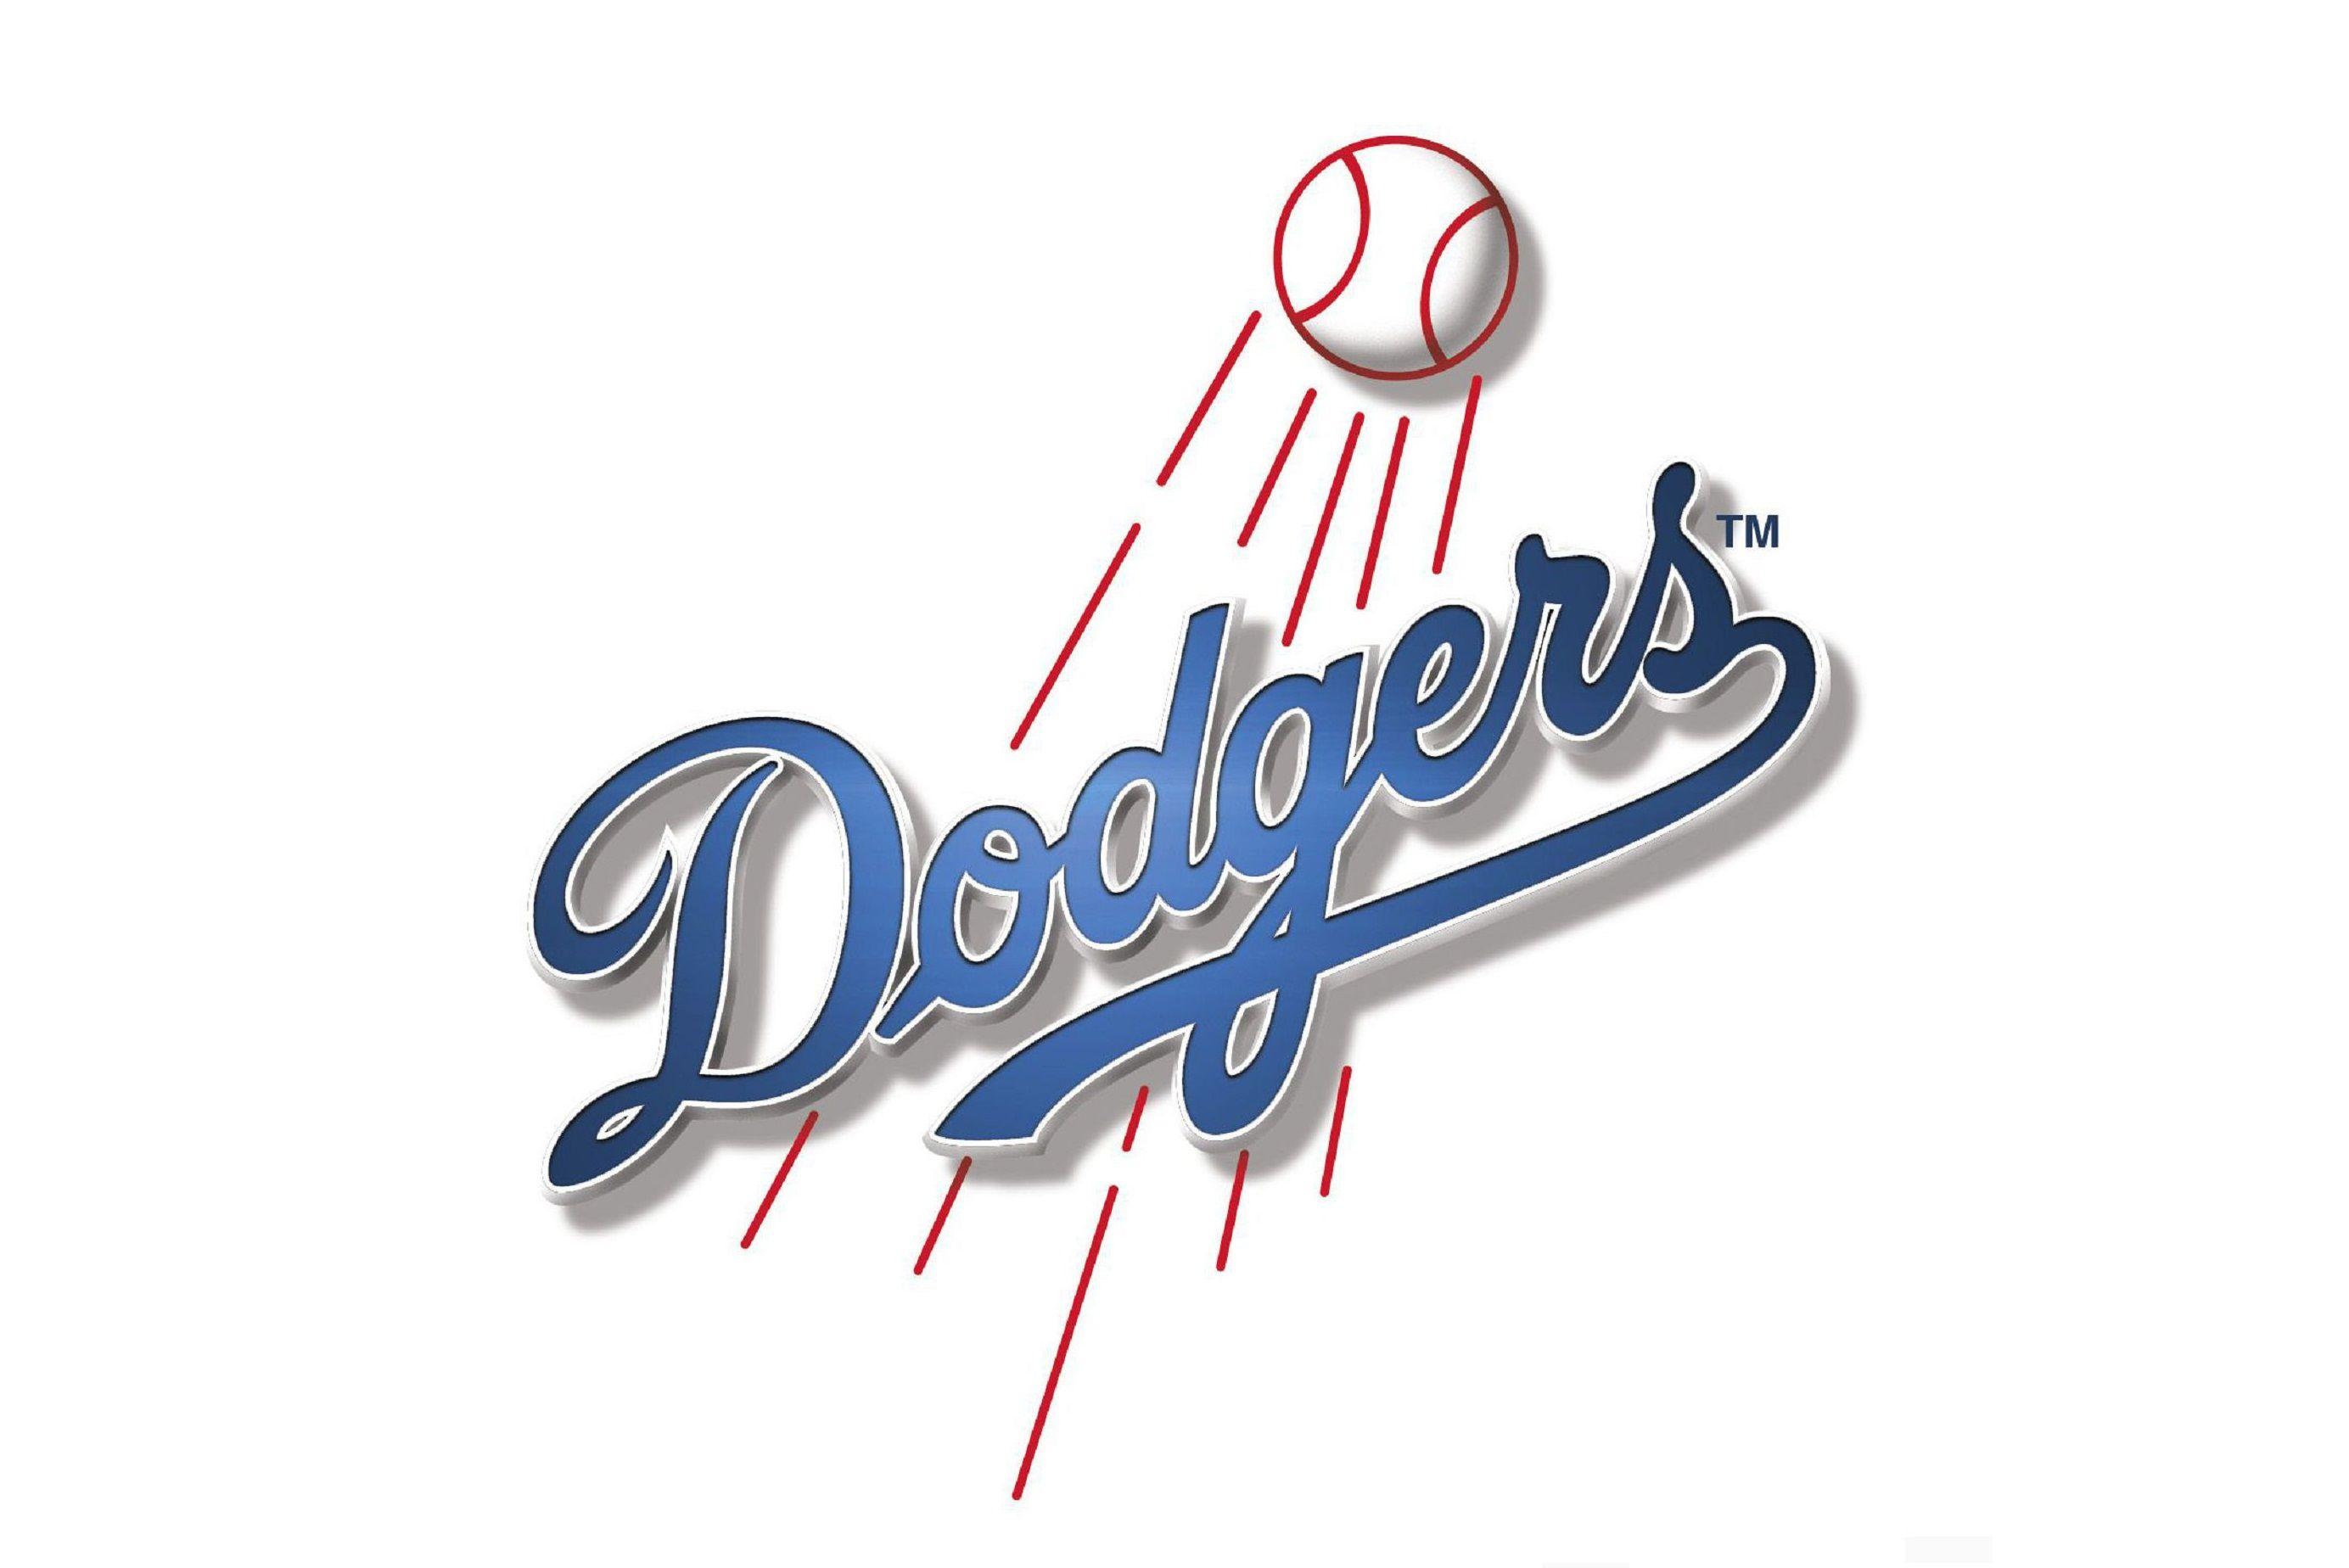 Los Angeles Dodgers Wallpaper Image Photo Picture Background